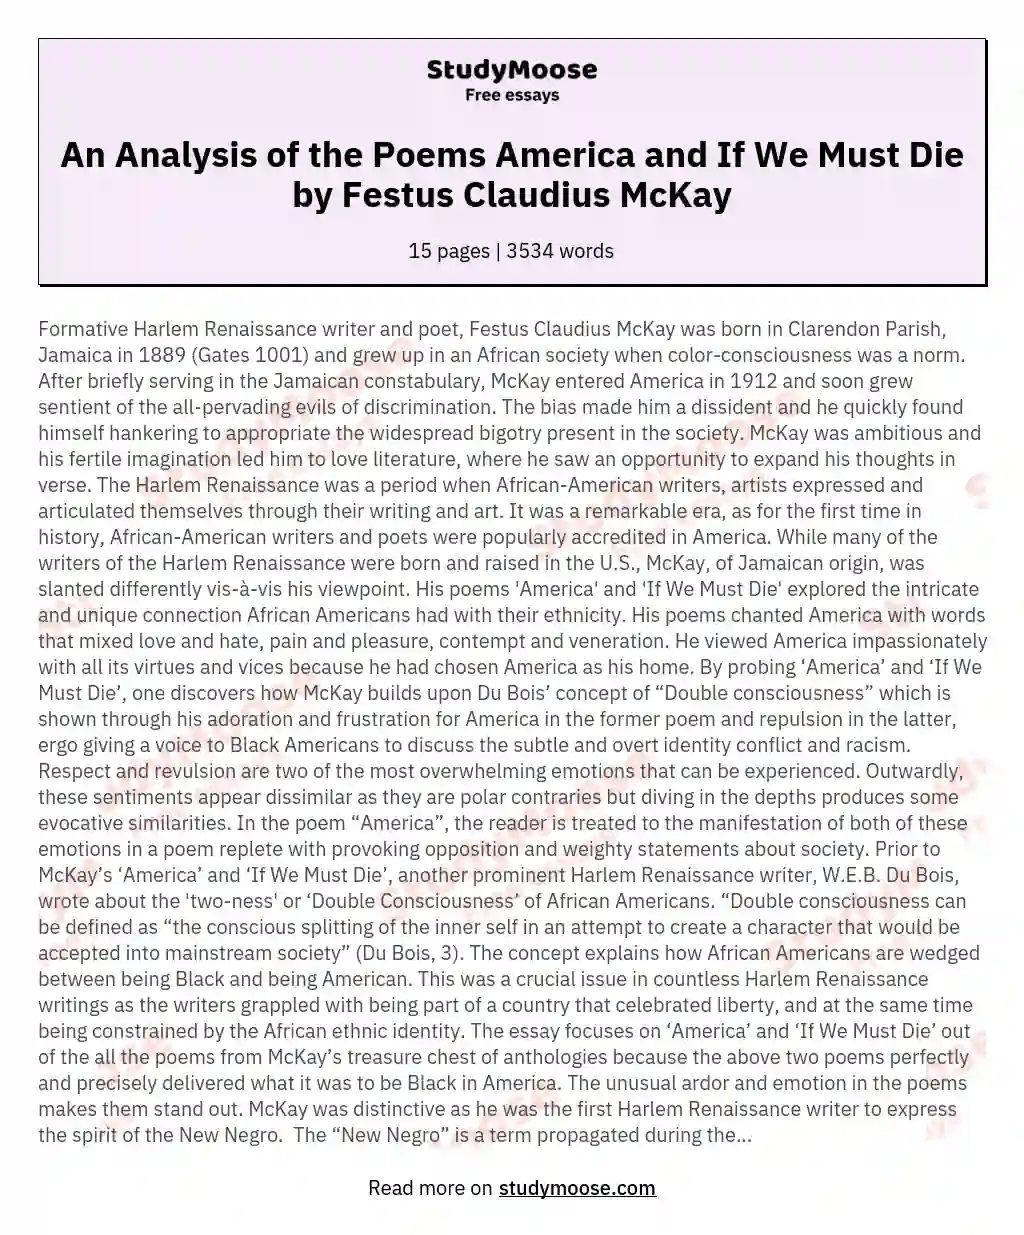 An Analysis of the Poems America and If We Must Die by Festus Claudius McKay essay